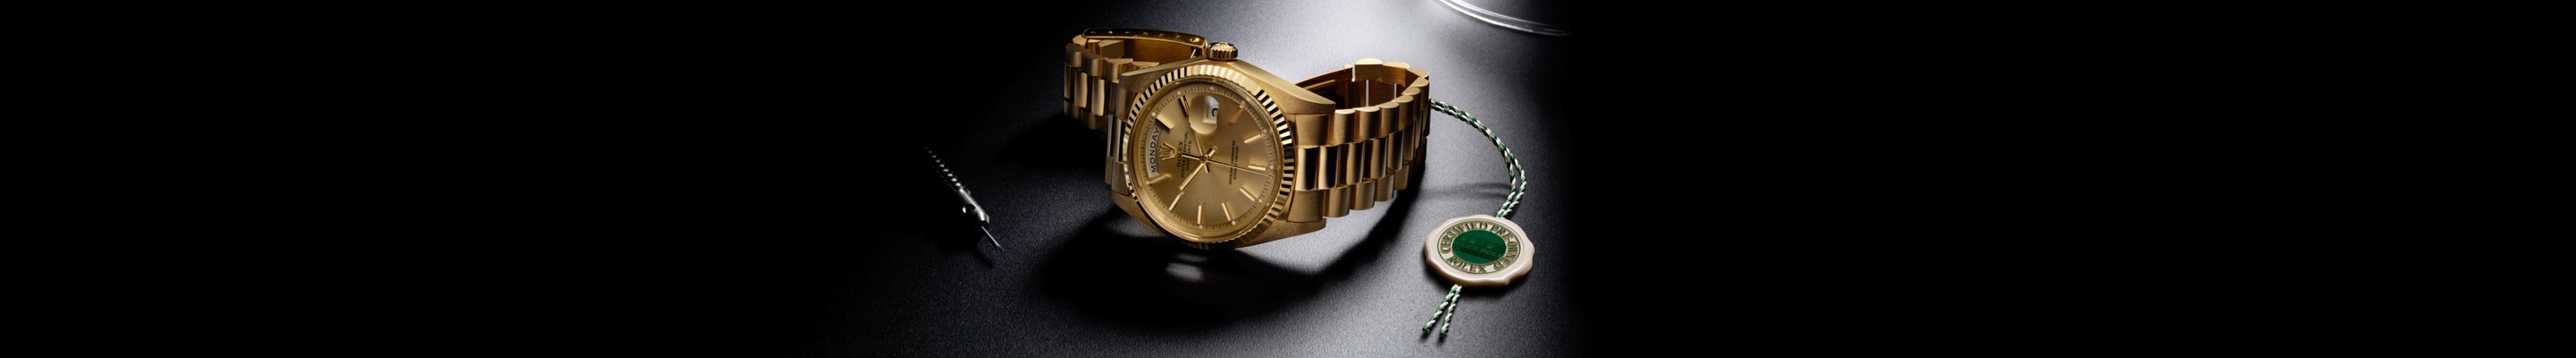 Rolex Certified Pre-owned Gold Watch